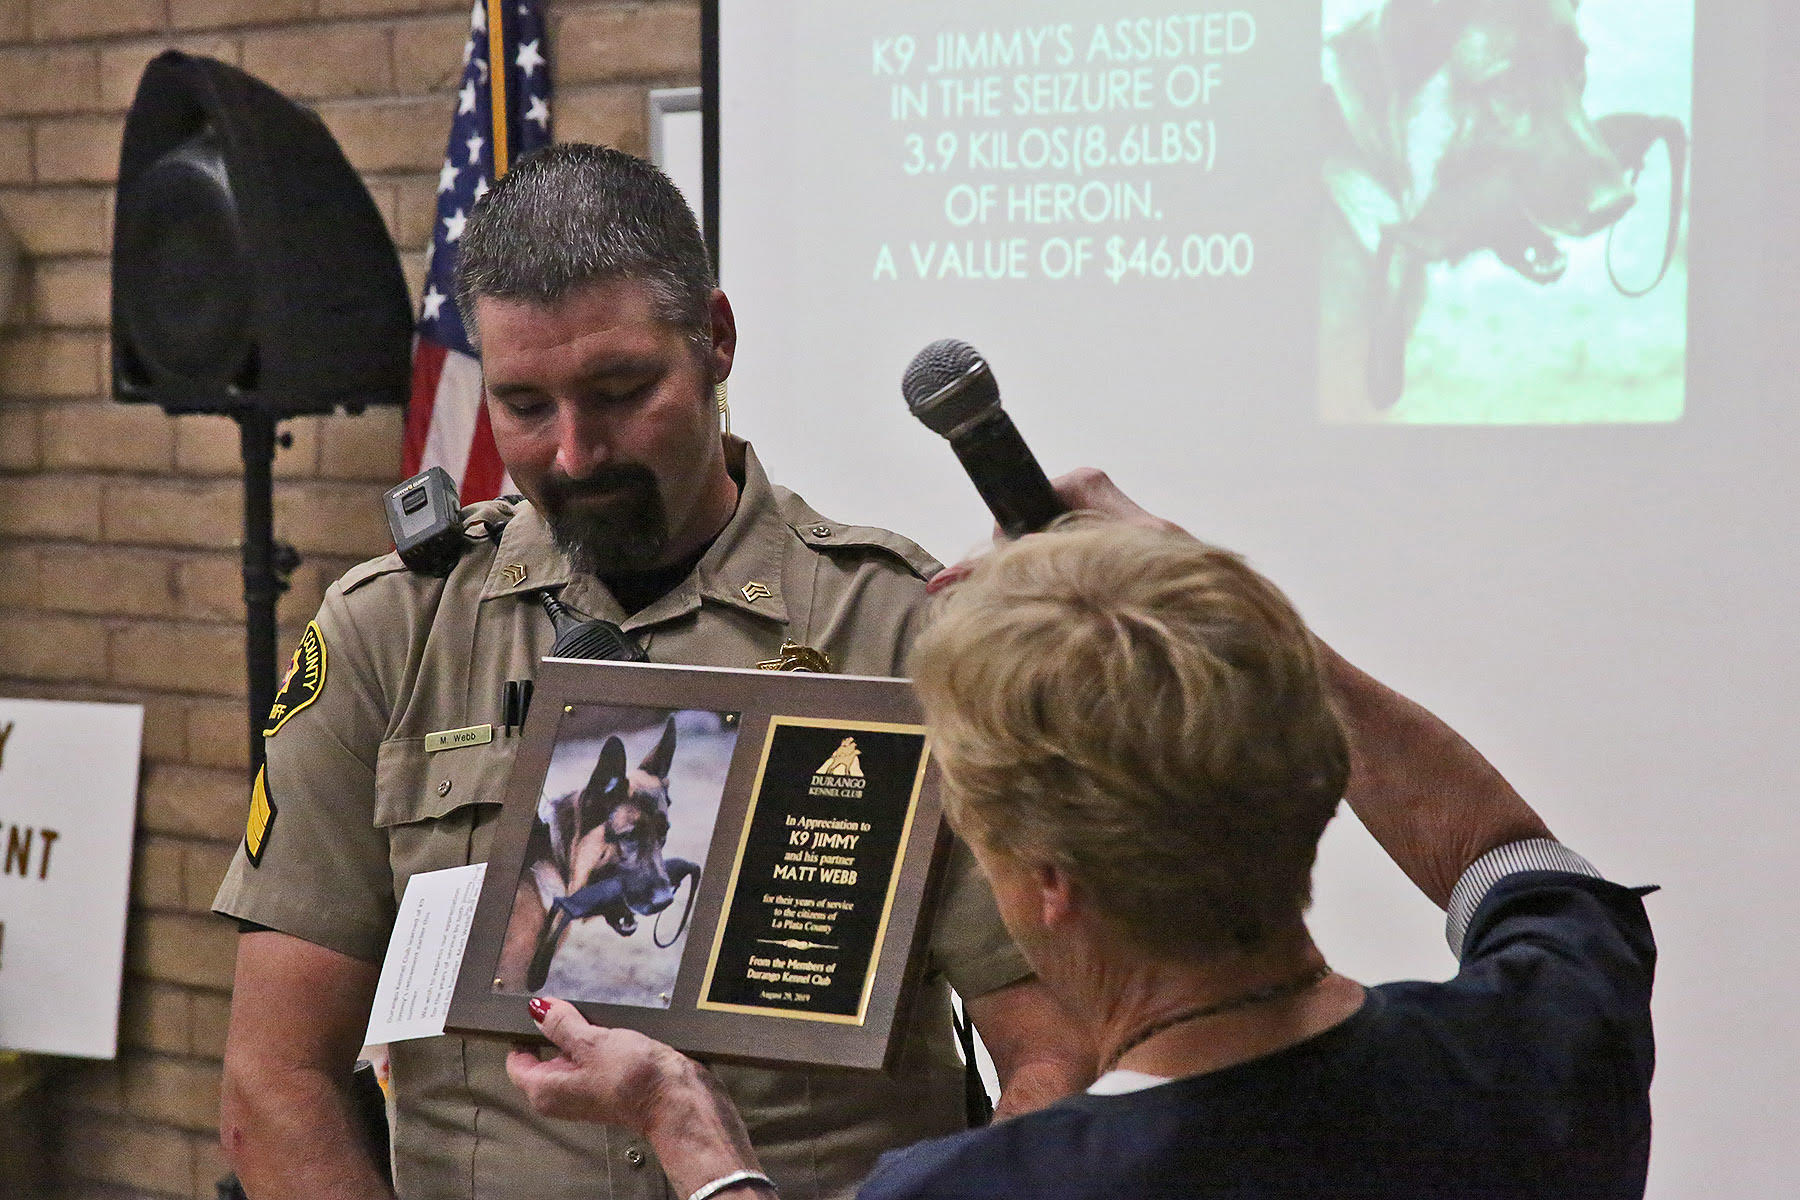 As K-9 Jimmy retires, Durango Kennel Club gives back!!